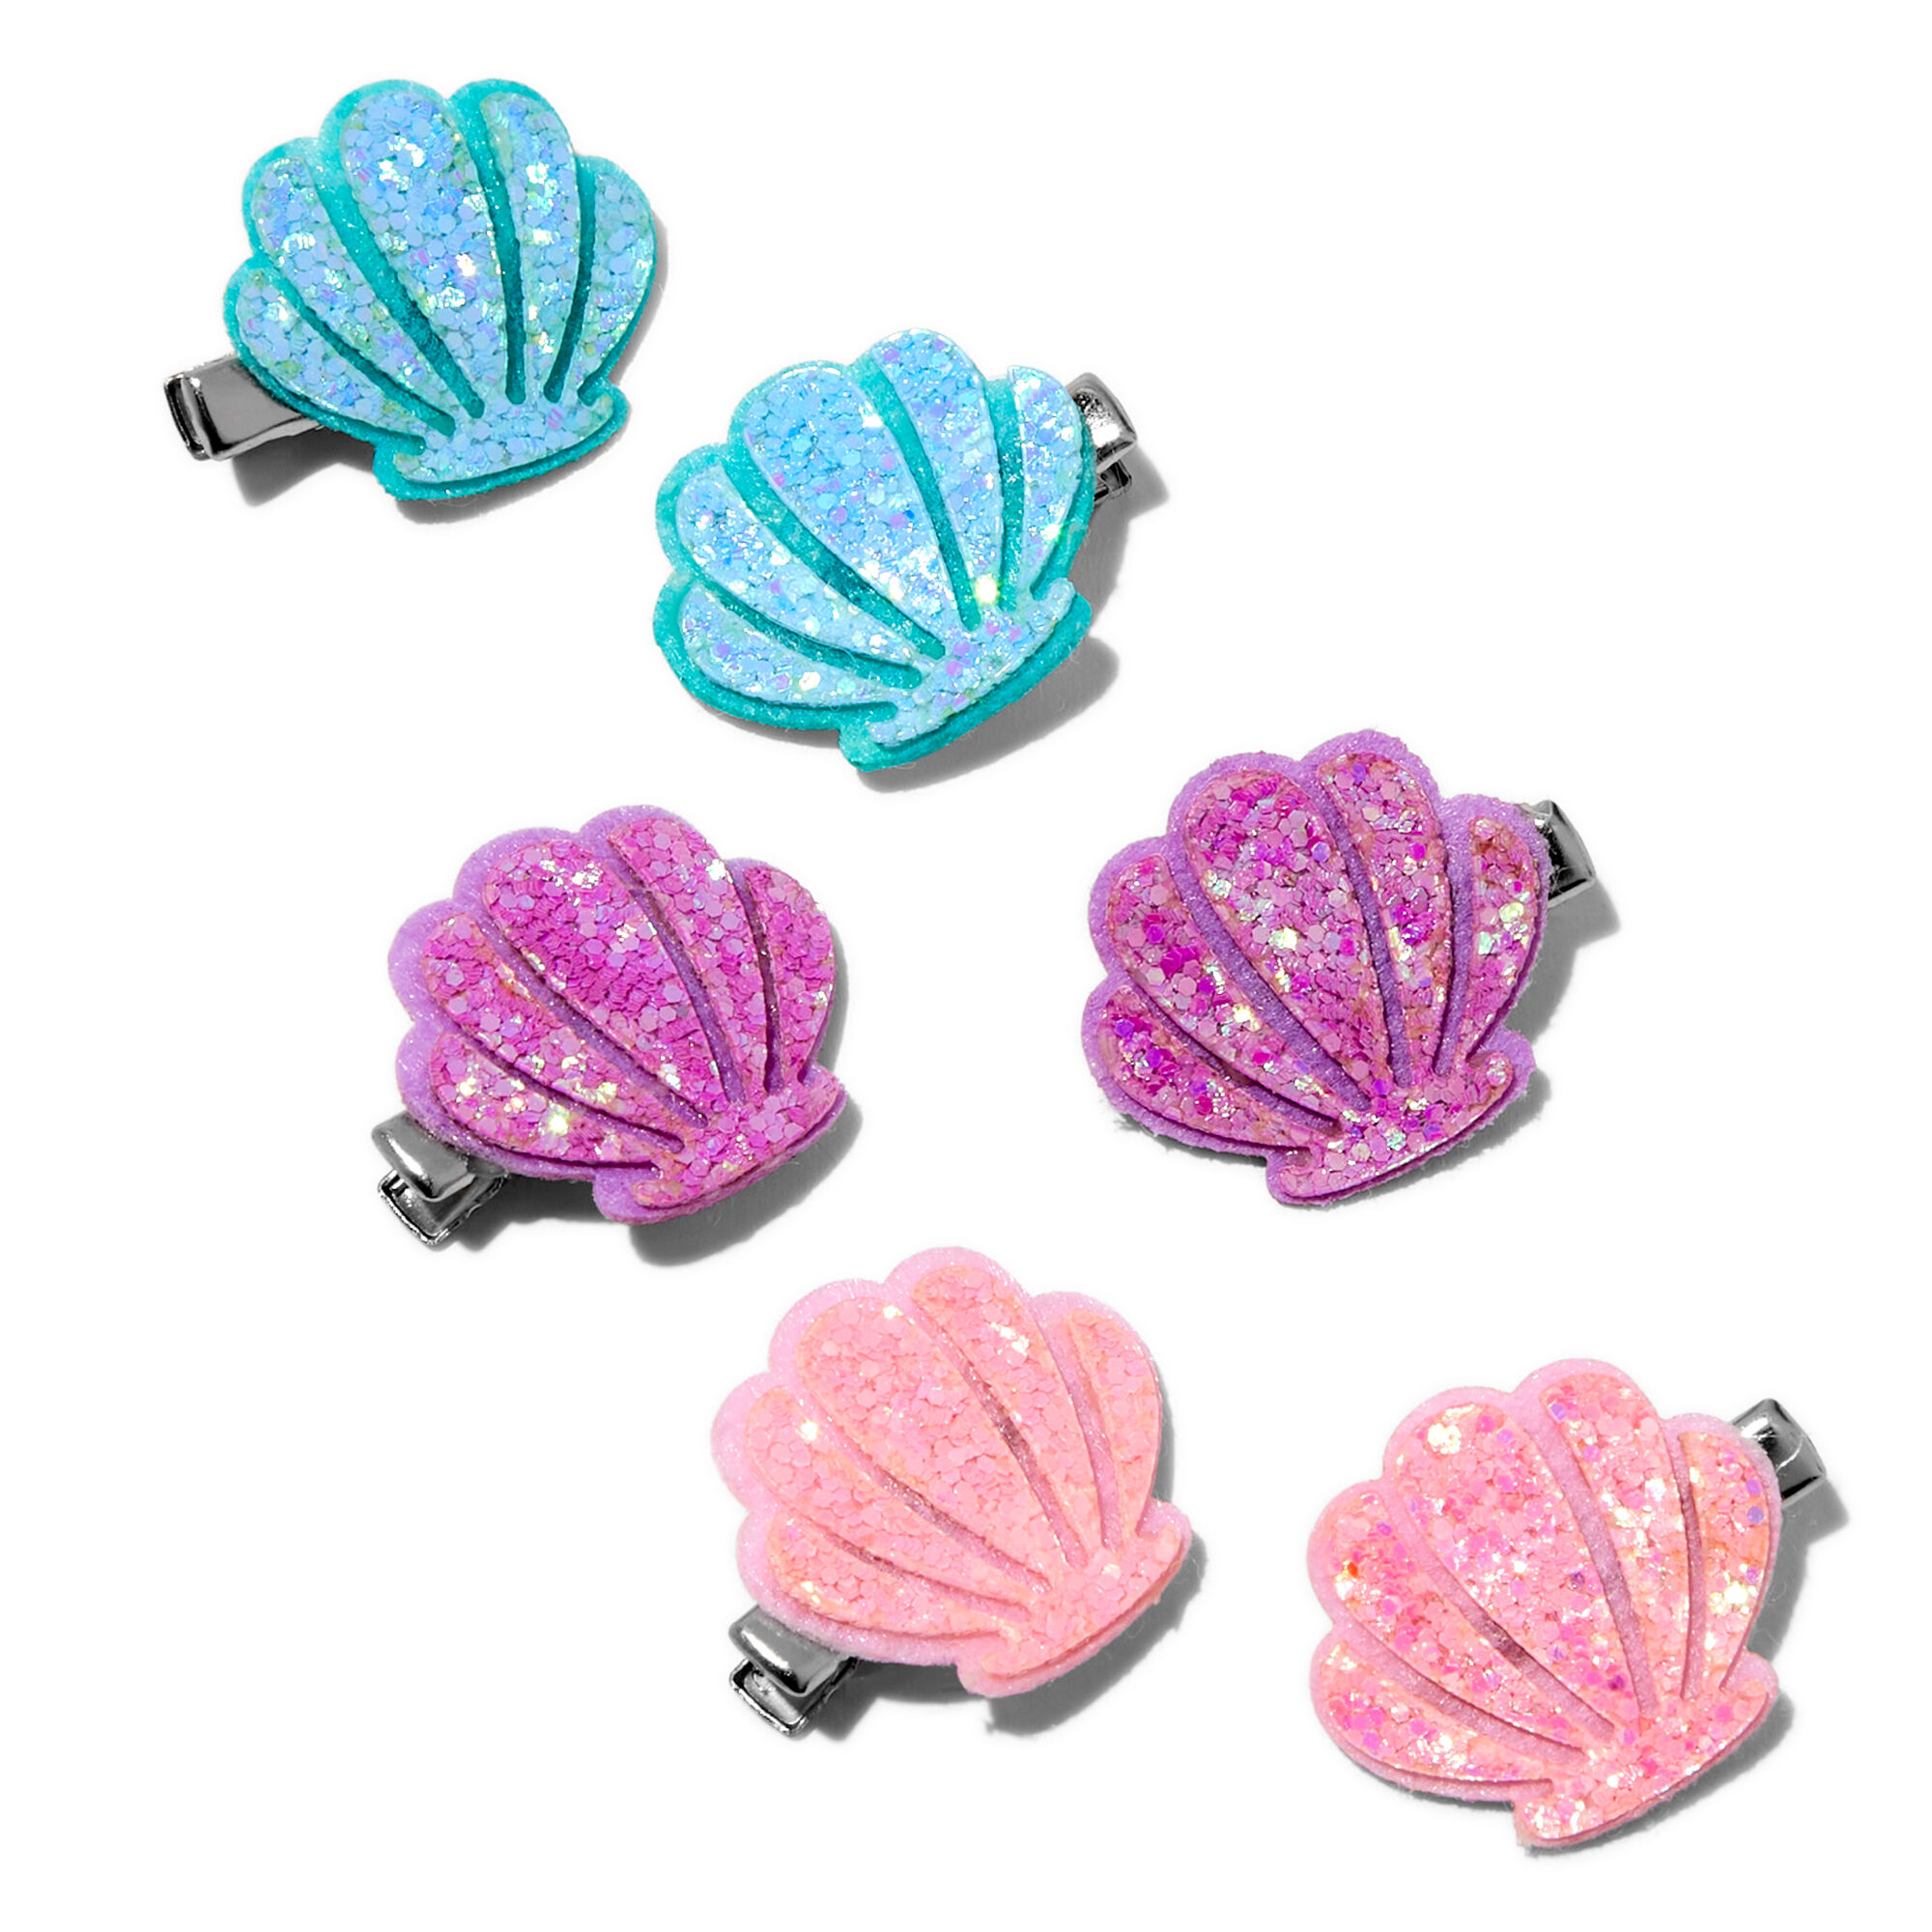 View Claires Club Glitter Shell Hair Clips 6 Pack information